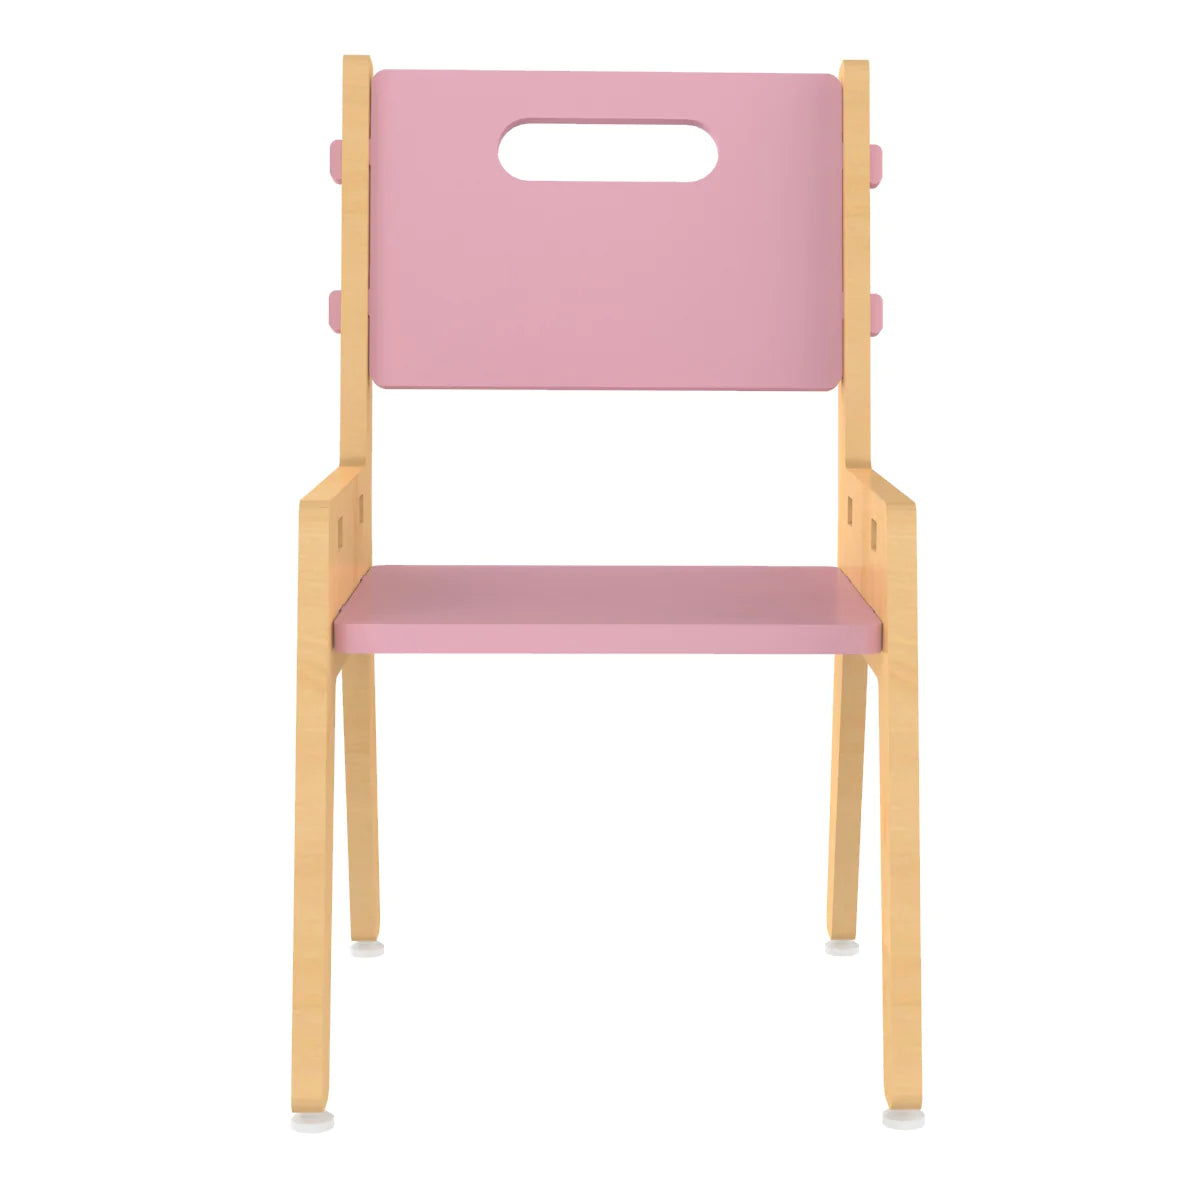 Buy Silver Peach Wooden Chair - Pink - Front View - SkilloToys.com